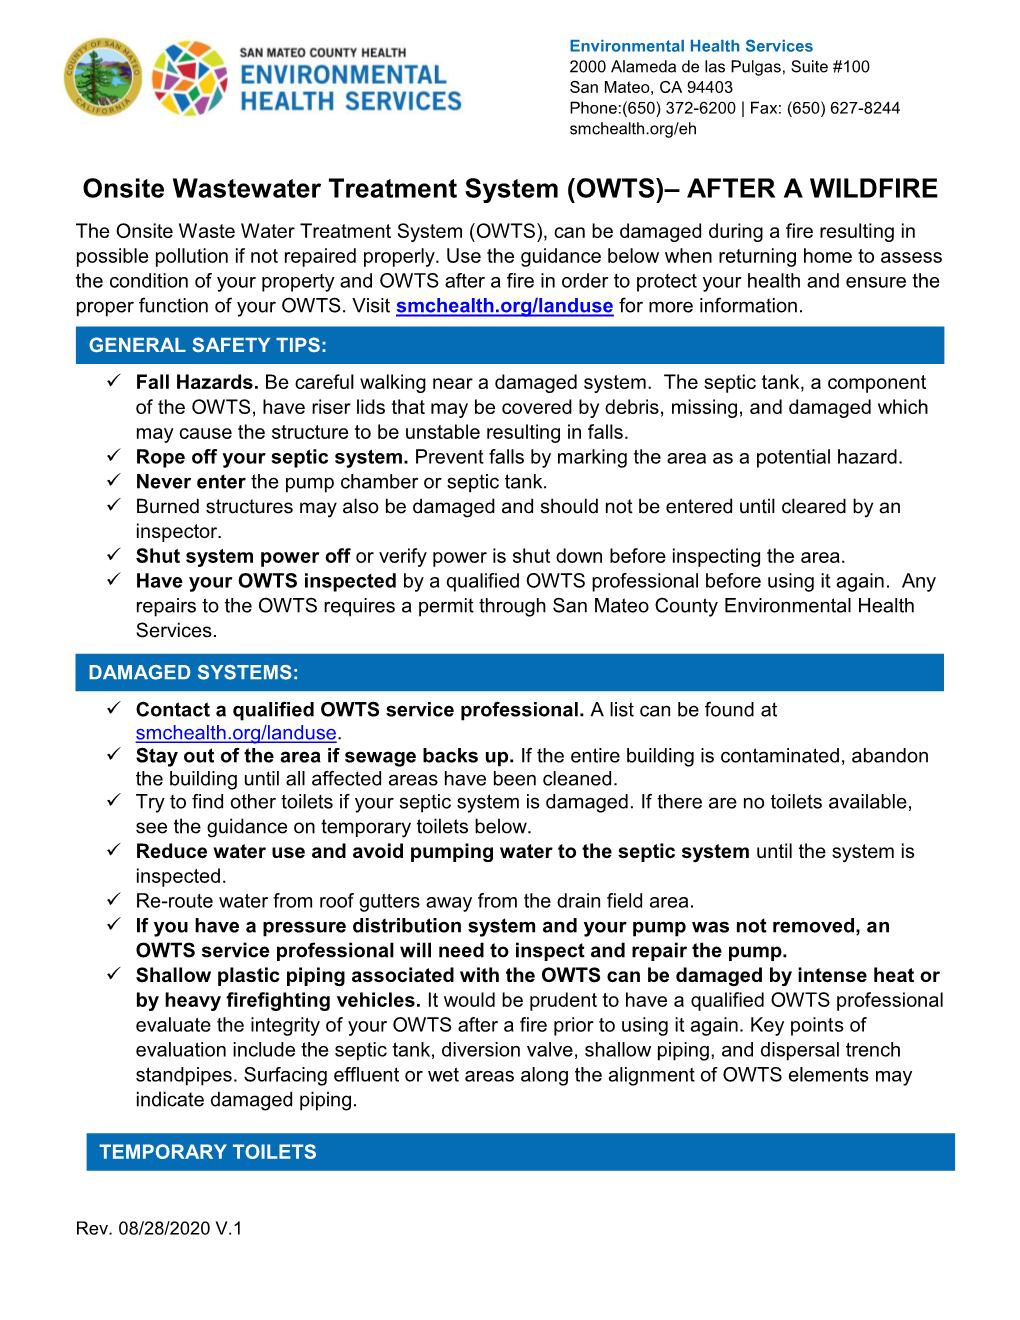 Onsite Wastewater Treatment System (OWTS)– AFTER a WILDFIRE